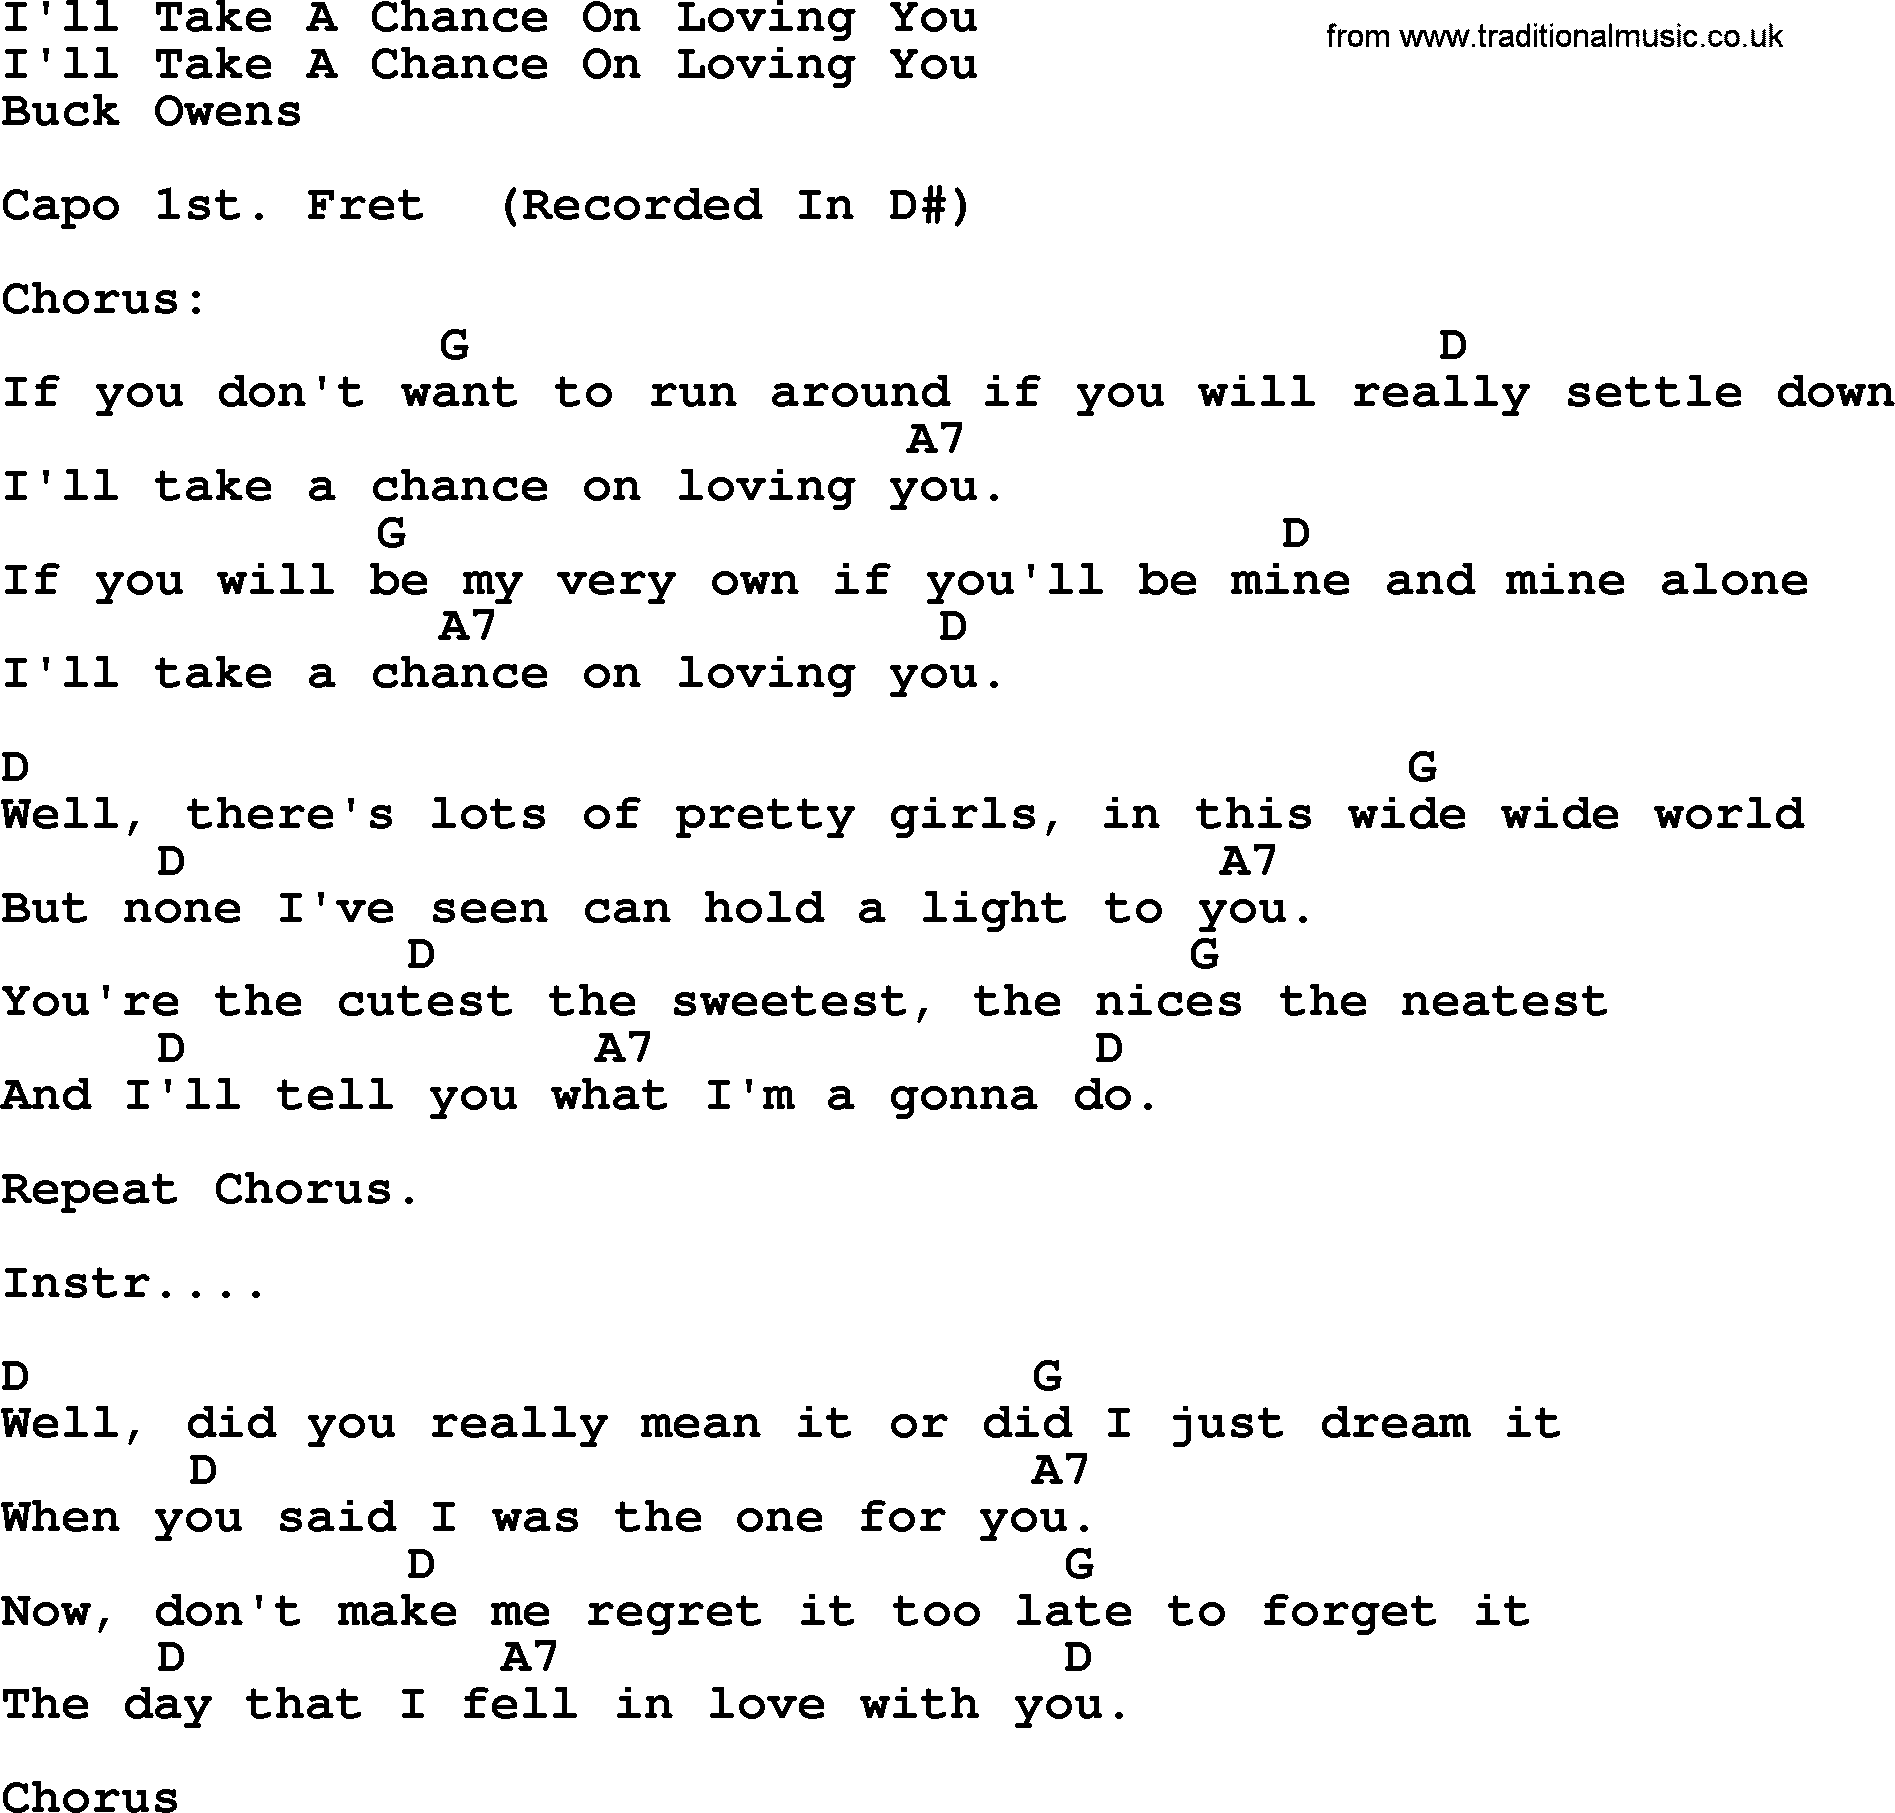 Bluegrass song: I'll Take A Chance On Loving You, lyrics and chords